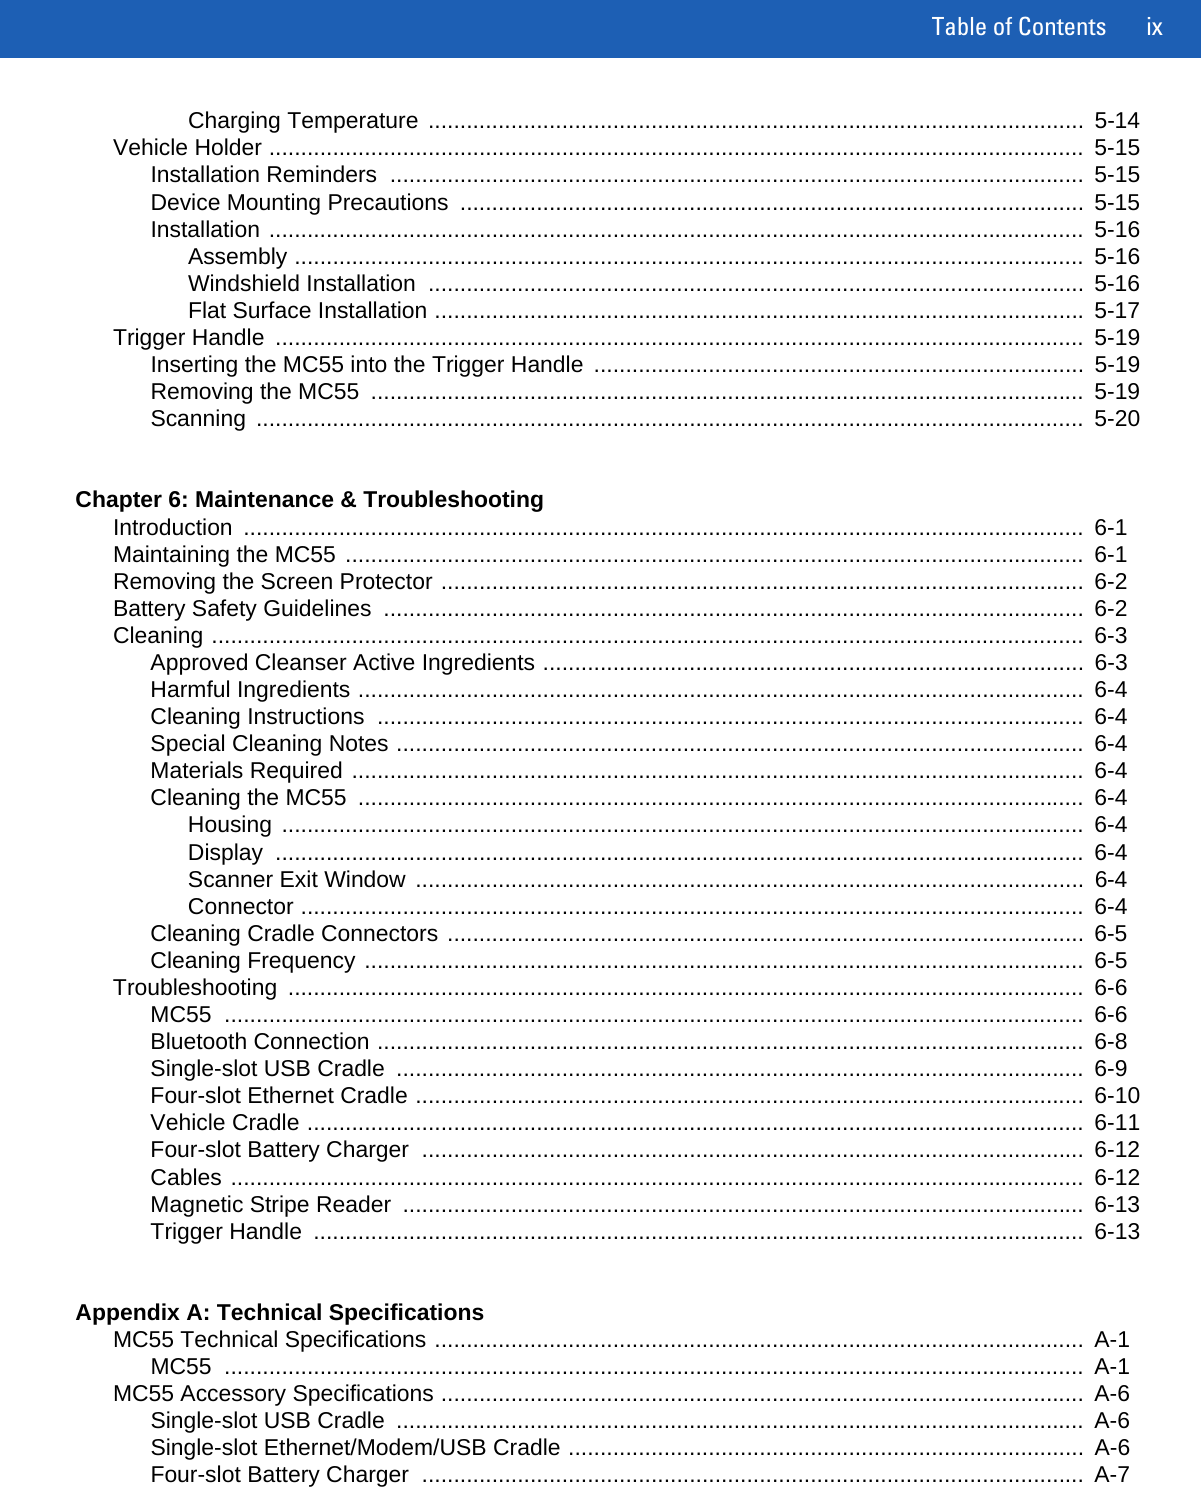 Table of Contents ixCharging Temperature .......................................................................................................  5-14Vehicle Holder ................................................................................................................................  5-15Installation Reminders  .............................................................................................................  5-15Device Mounting Precautions  ..................................................................................................  5-15Installation ................................................................................................................................  5-16Assembly ............................................................................................................................  5-16Windshield Installation  .......................................................................................................  5-16Flat Surface Installation ......................................................................................................  5-17Trigger Handle  ...............................................................................................................................  5-19Inserting the MC55 into the Trigger Handle  .............................................................................  5-19Removing the MC55  ................................................................................................................  5-19Scanning ..................................................................................................................................  5-20Chapter 6: Maintenance &amp; TroubleshootingIntroduction ....................................................................................................................................  6-1Maintaining the MC55 ....................................................................................................................  6-1Removing the Screen Protector .....................................................................................................  6-2Battery Safety Guidelines  ..............................................................................................................  6-2Cleaning .........................................................................................................................................  6-3Approved Cleanser Active Ingredients .....................................................................................  6-3Harmful Ingredients ..................................................................................................................  6-4Cleaning Instructions  ...............................................................................................................  6-4Special Cleaning Notes ............................................................................................................  6-4Materials Required ...................................................................................................................  6-4Cleaning the MC55  ..................................................................................................................  6-4Housing ..............................................................................................................................  6-4Display ...............................................................................................................................  6-4Scanner Exit Window .........................................................................................................  6-4Connector ...........................................................................................................................  6-4Cleaning Cradle Connectors ....................................................................................................  6-5Cleaning Frequency .................................................................................................................  6-5Troubleshooting .............................................................................................................................  6-6MC55 .......................................................................................................................................  6-6Bluetooth Connection ...............................................................................................................  6-8Single-slot USB Cradle  ............................................................................................................  6-9Four-slot Ethernet Cradle .........................................................................................................  6-10Vehicle Cradle ..........................................................................................................................  6-11Four-slot Battery Charger  ........................................................................................................  6-12Cables ......................................................................................................................................  6-12Magnetic Stripe Reader  ...........................................................................................................  6-13Trigger Handle  .........................................................................................................................  6-13Appendix A: Technical SpecificationsMC55 Technical Specifications ......................................................................................................  A-1MC55 .......................................................................................................................................  A-1MC55 Accessory Specifications .....................................................................................................  A-6Single-slot USB Cradle  ............................................................................................................  A-6Single-slot Ethernet/Modem/USB Cradle .................................................................................  A-6Four-slot Battery Charger  ........................................................................................................  A-7